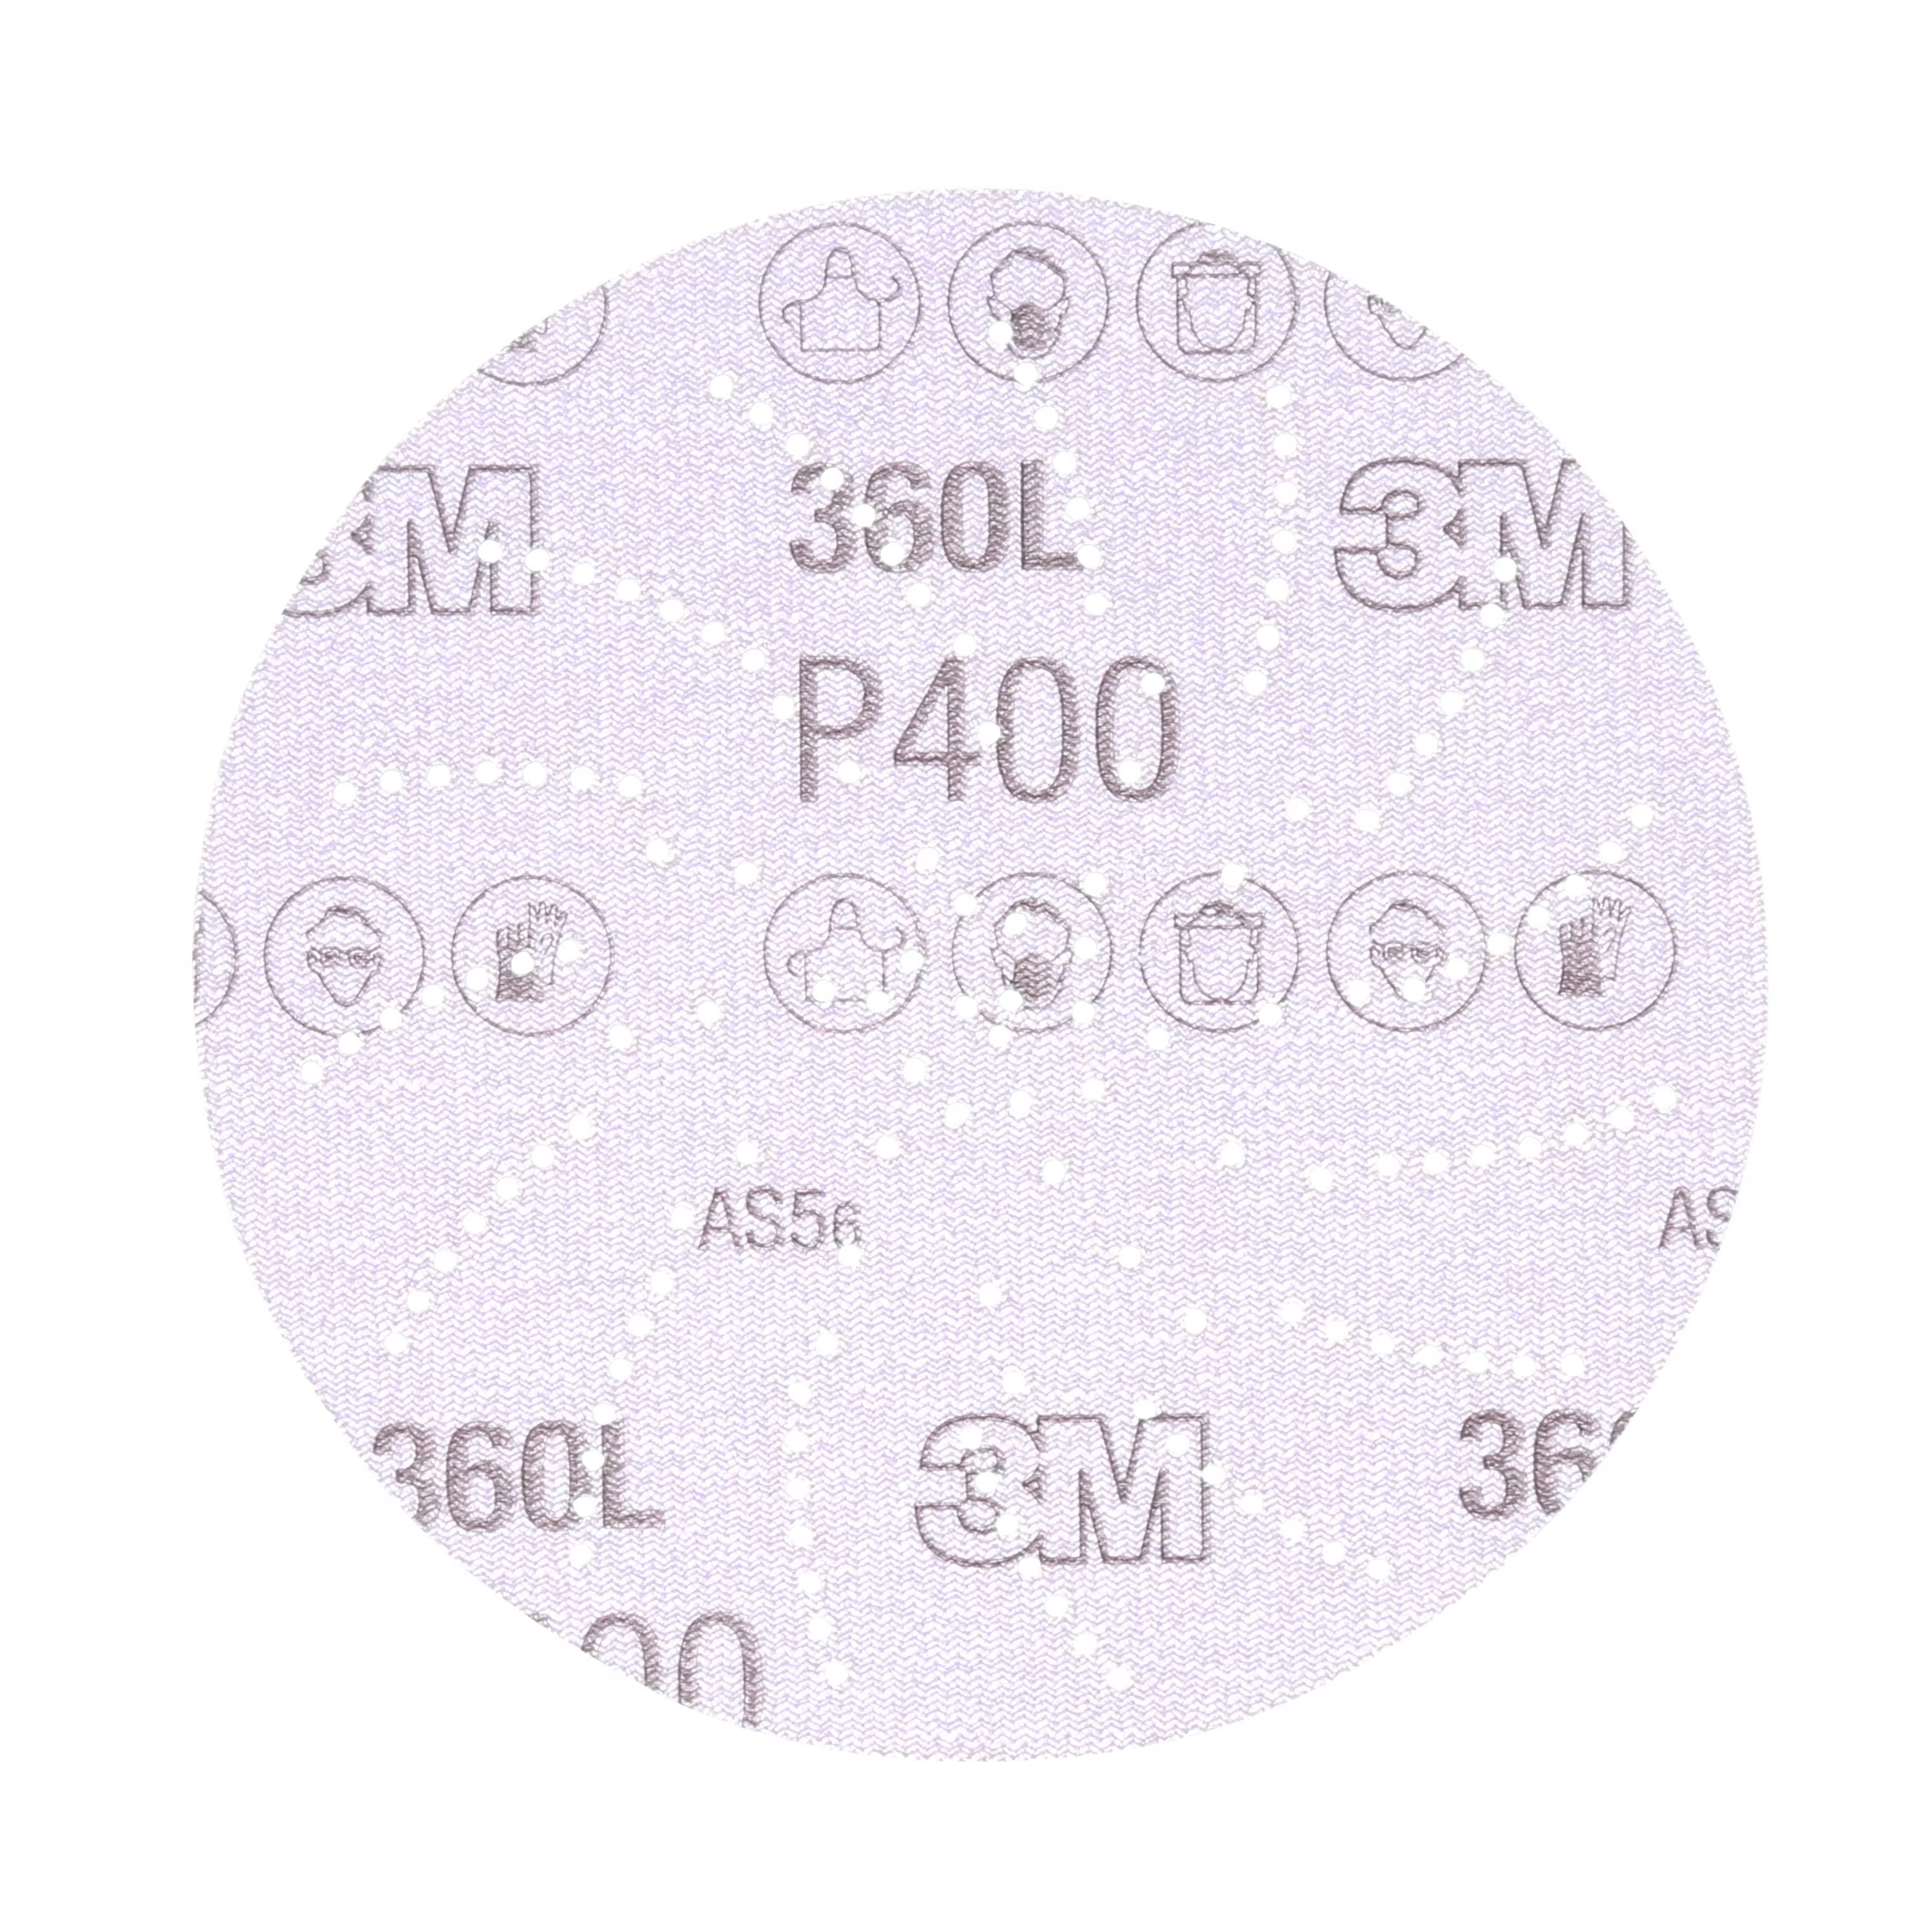 3M Xtract™ Film Disc 360L, 20888, P400 3MIL, 3 in, Die 300LG,
100/Carton, 500 ea/Case, Shrink Wrapped